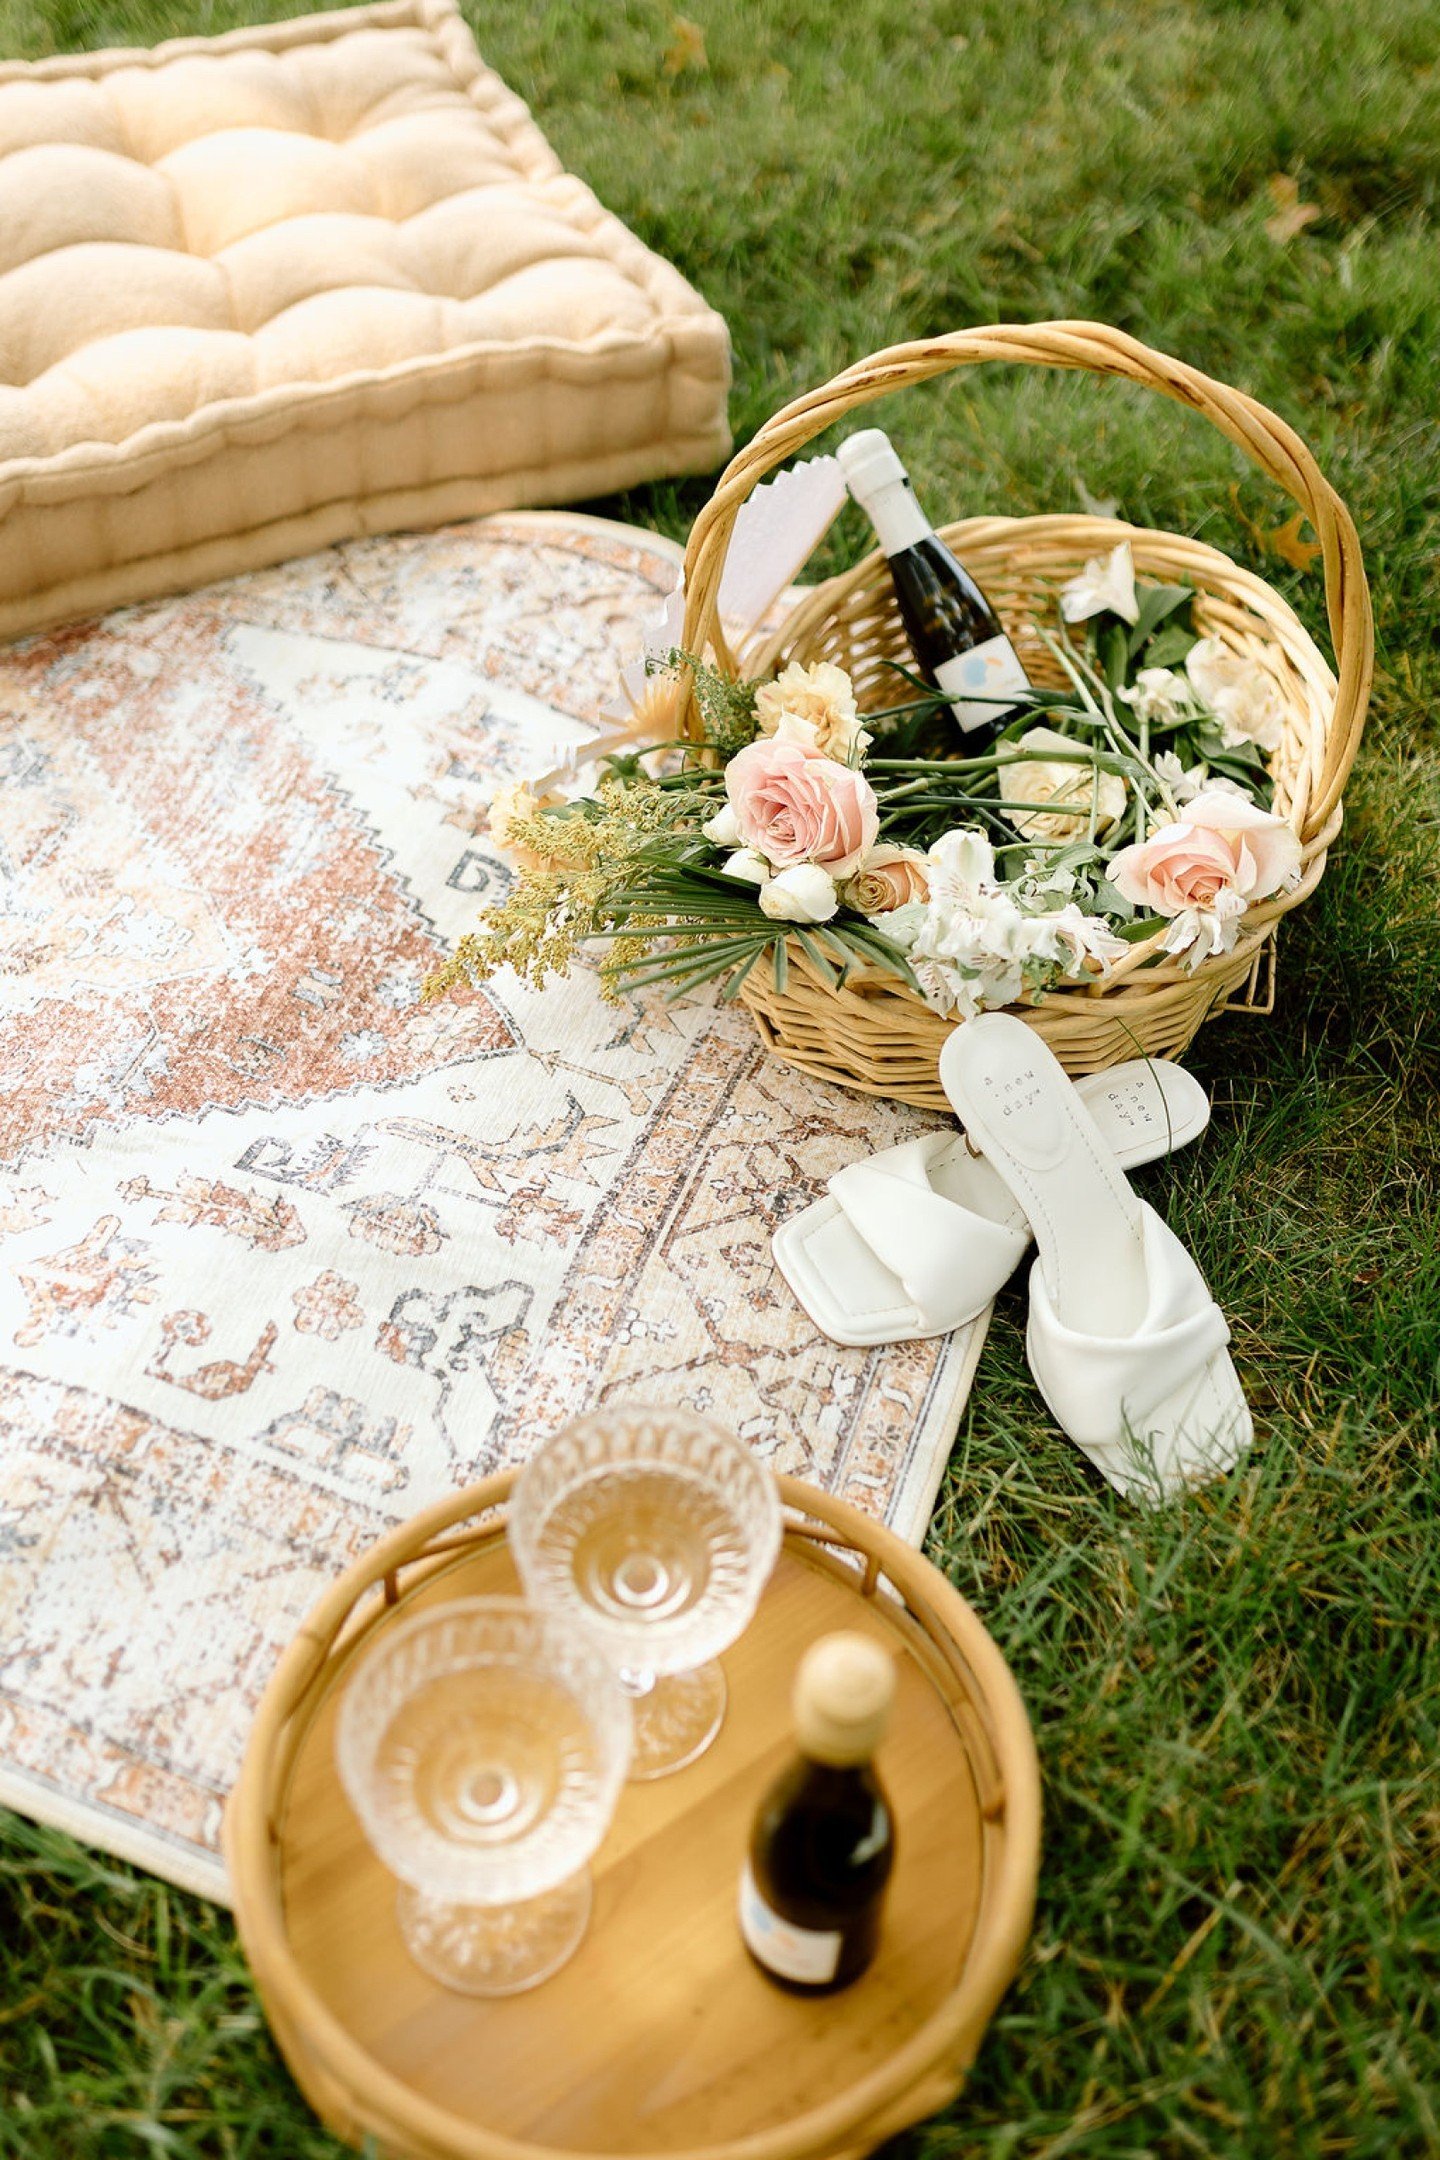 A picnic proposal&hellip;yes please 👏🏼